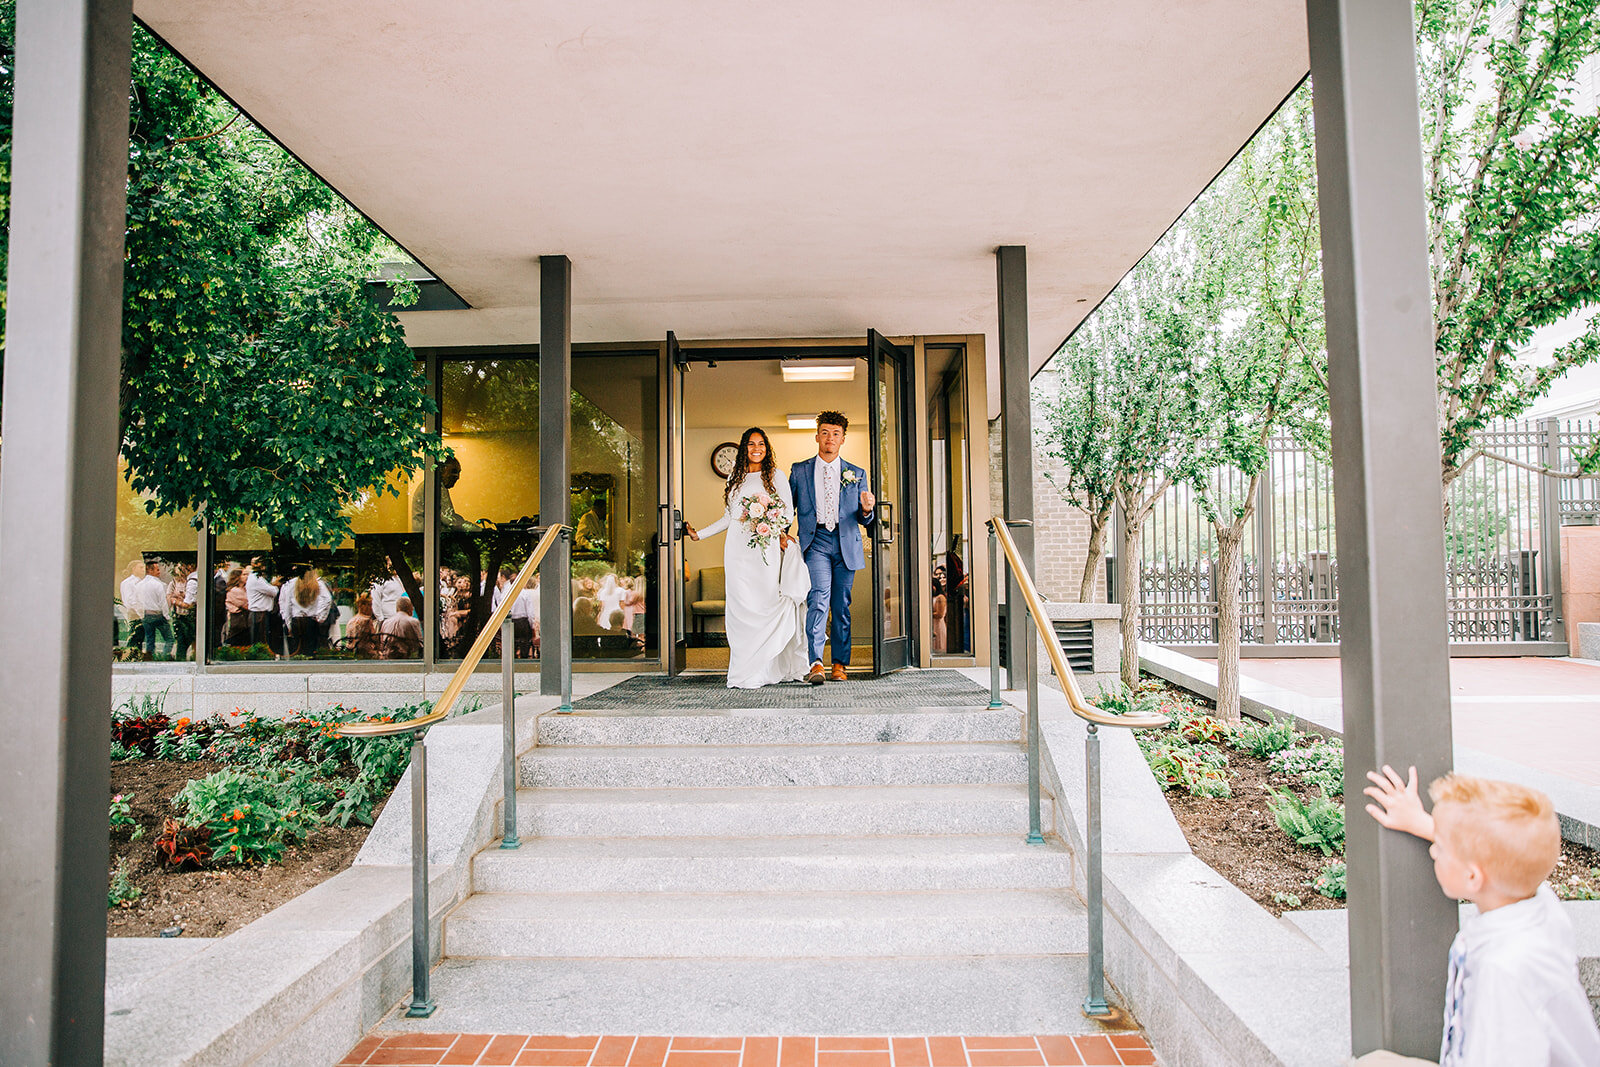  temple exit bride and groom blue suit wedding style inspiration lds temple exit after sealing ceremony salt lake city lds temple wedding utah couple temple square professional wedding photos affordable wedding photographer bella alder photography #b